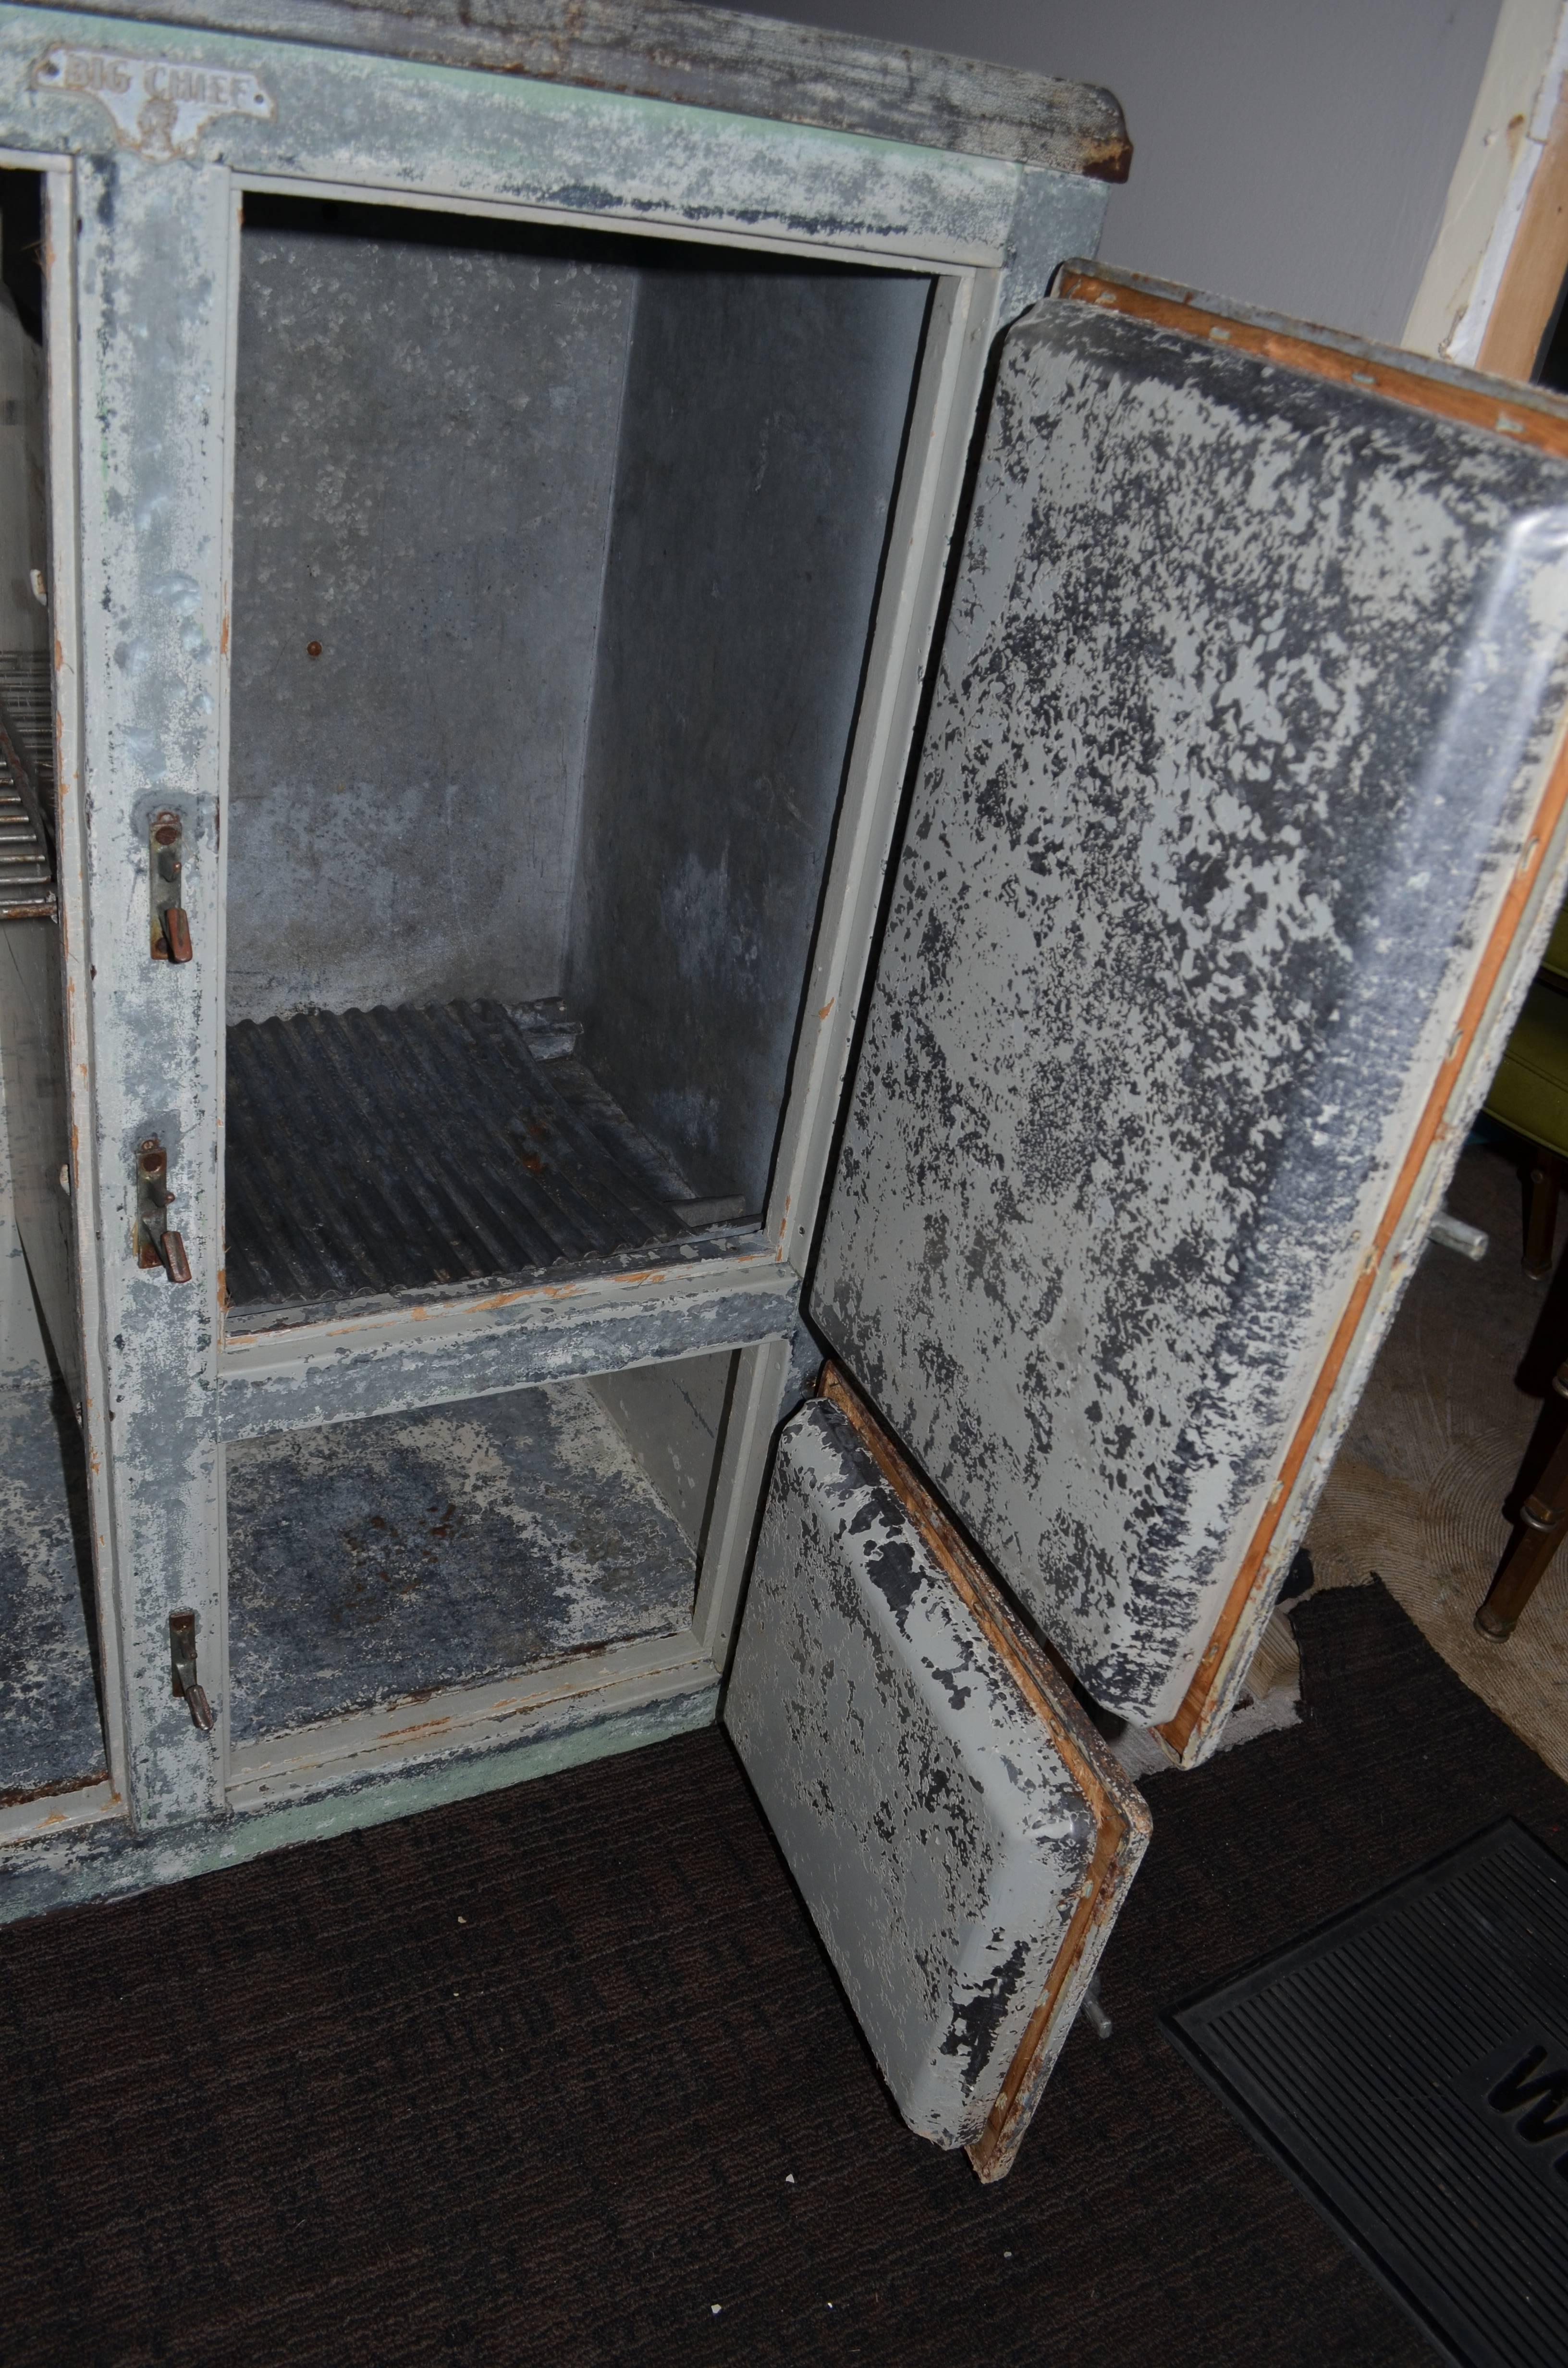 20th Century Bar or Storage Cabinet from 1920s Refrigerator